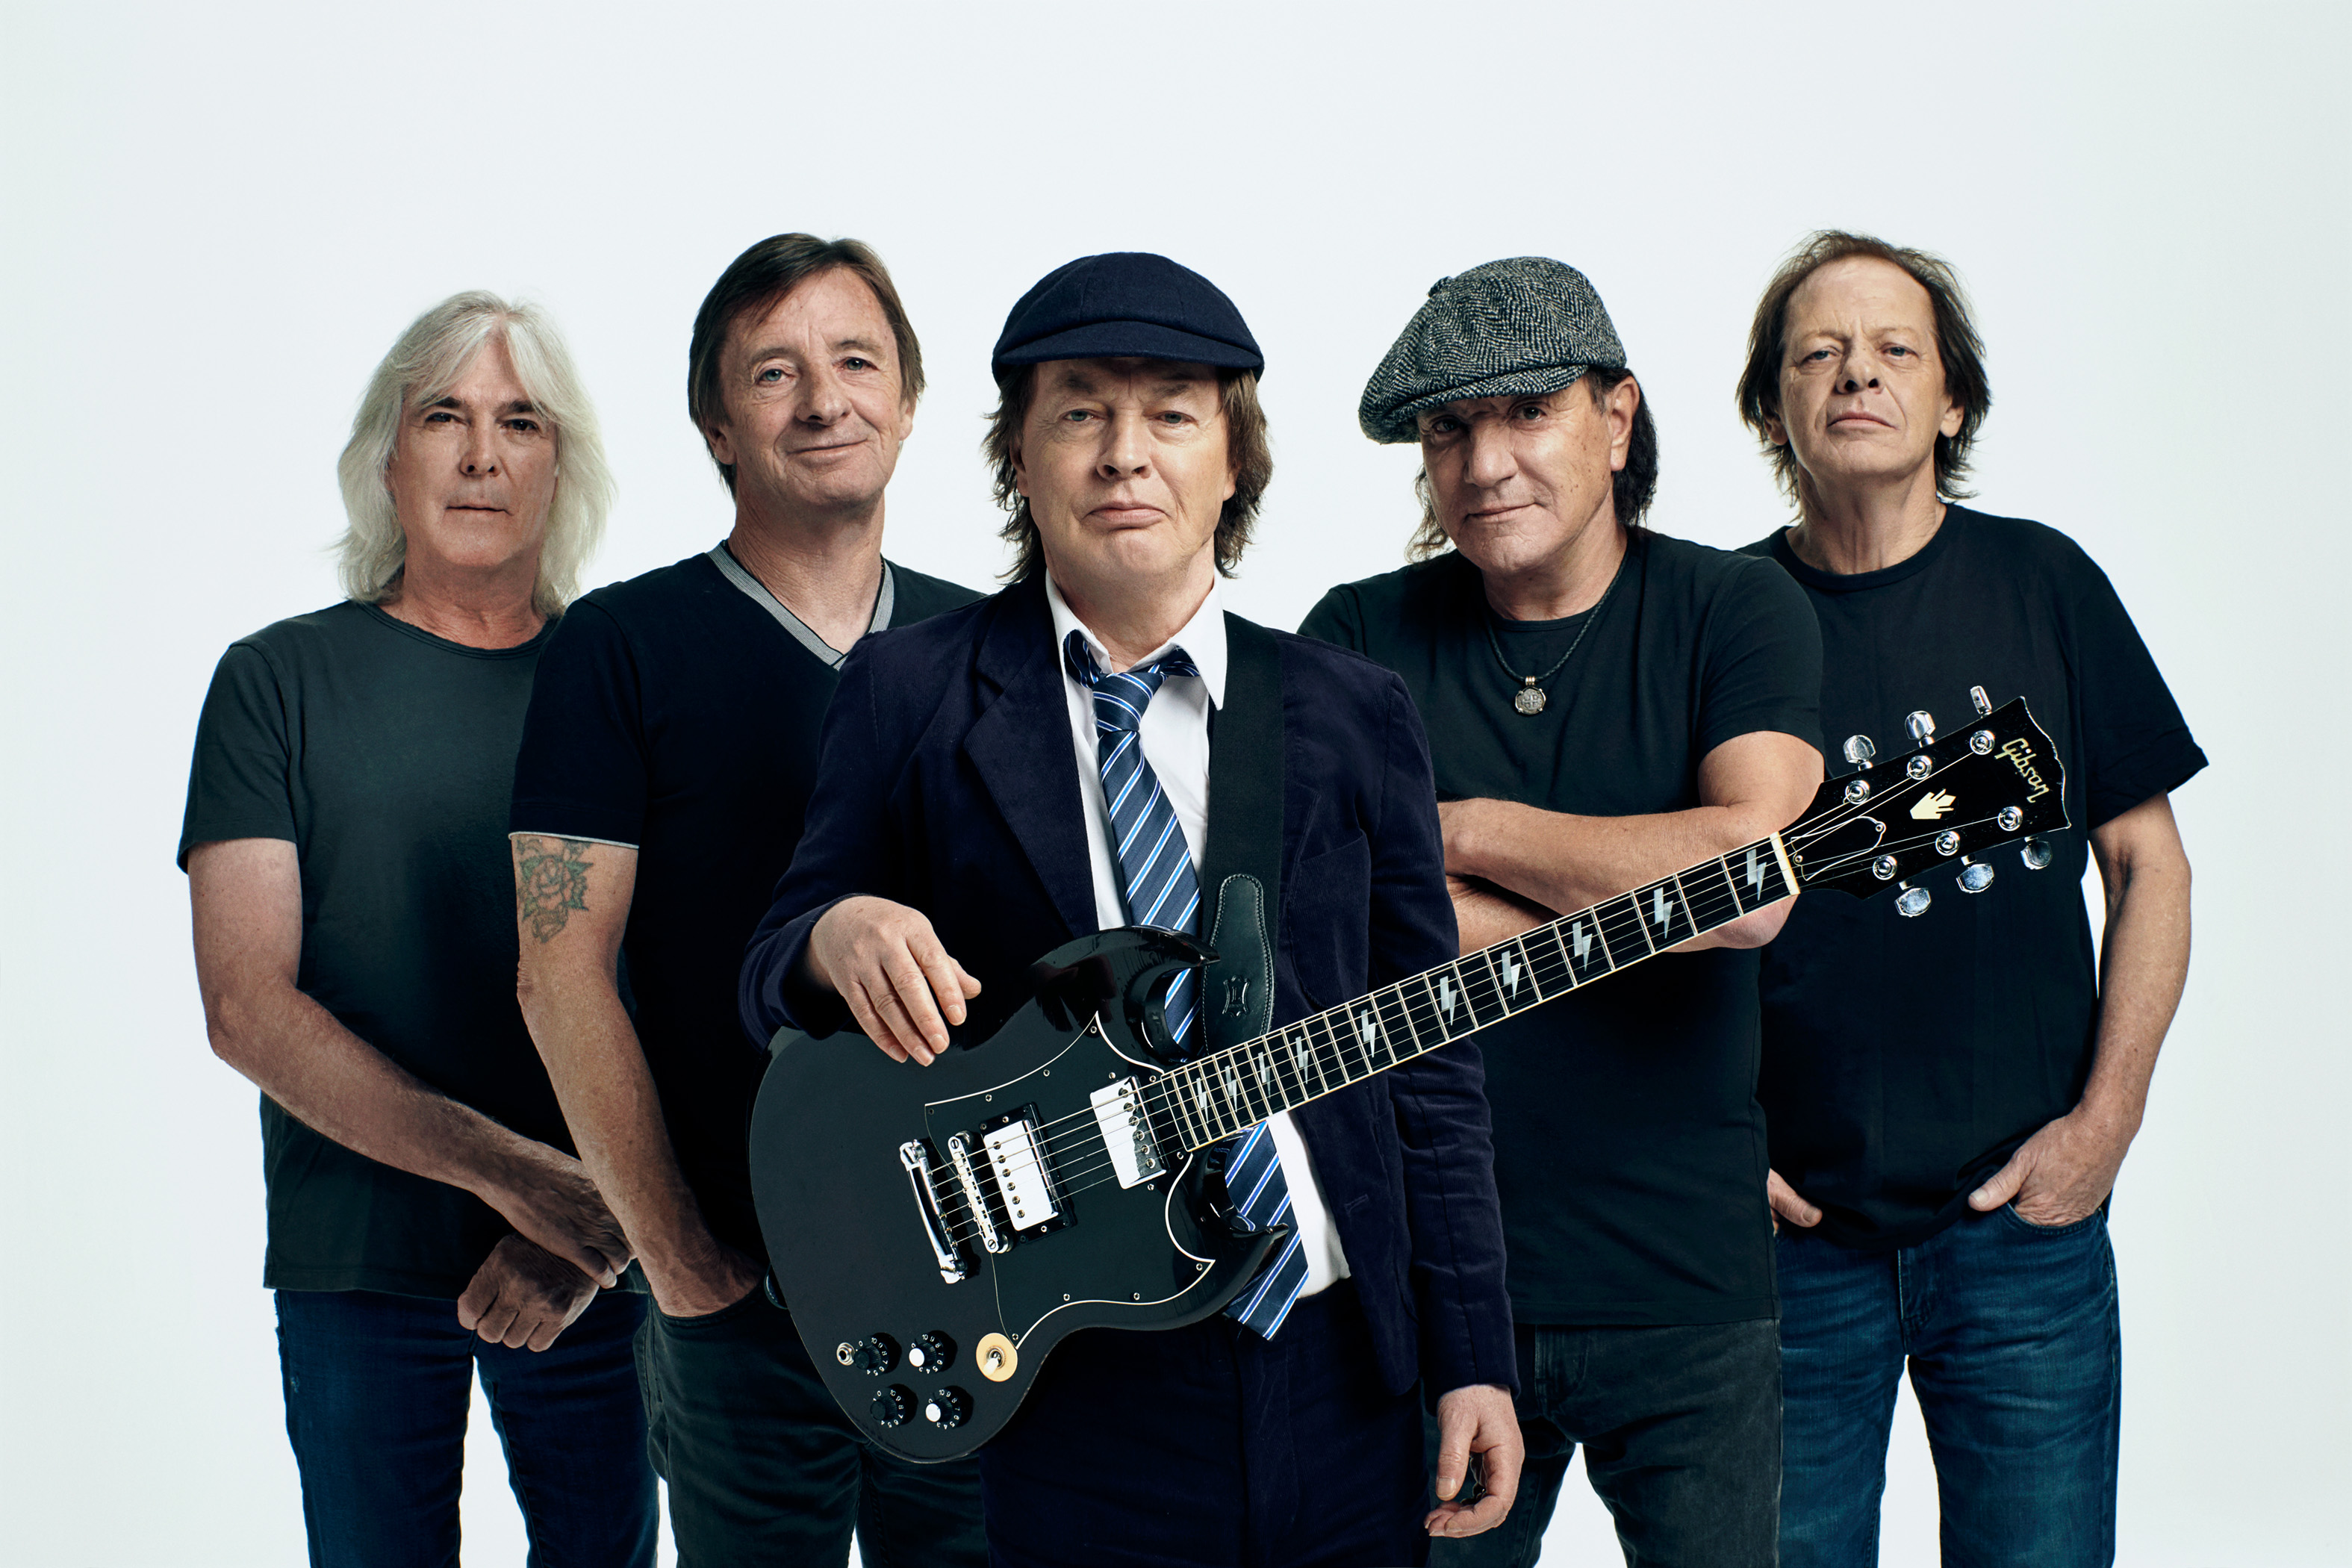 Legendary Rock Outfit AC/DC Hit Number One With New Album ‘Power Up’